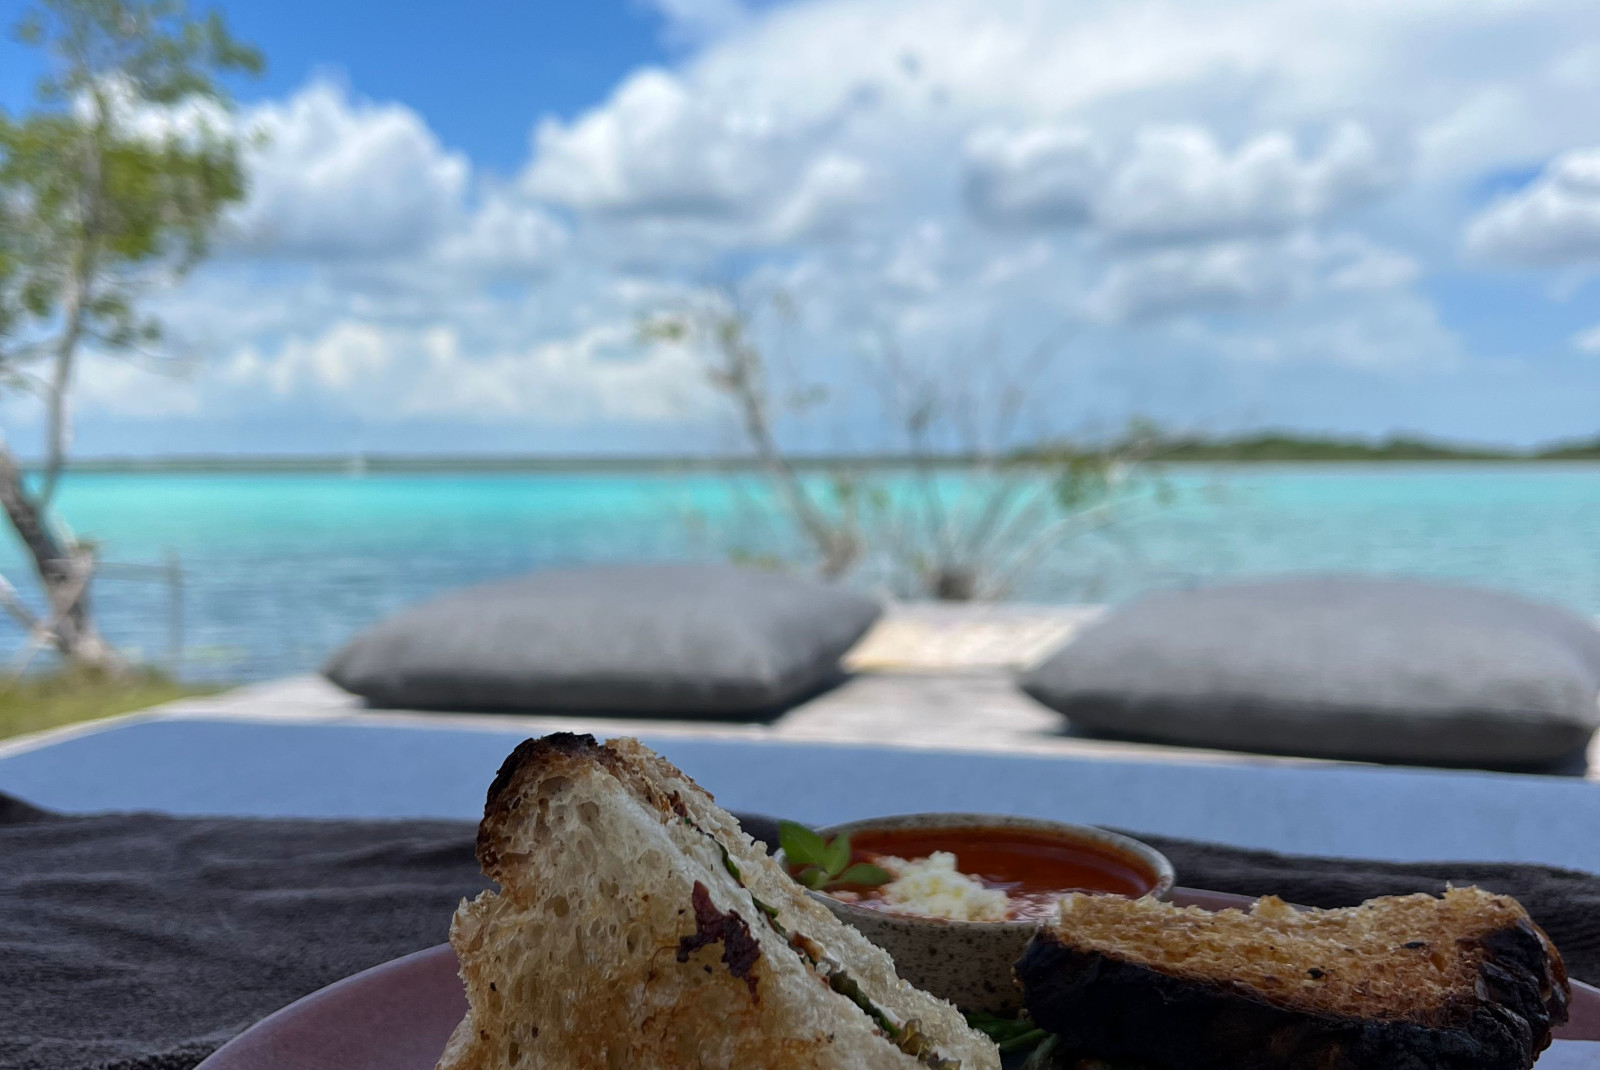 Sandwich on a plate in front of a blue sea.